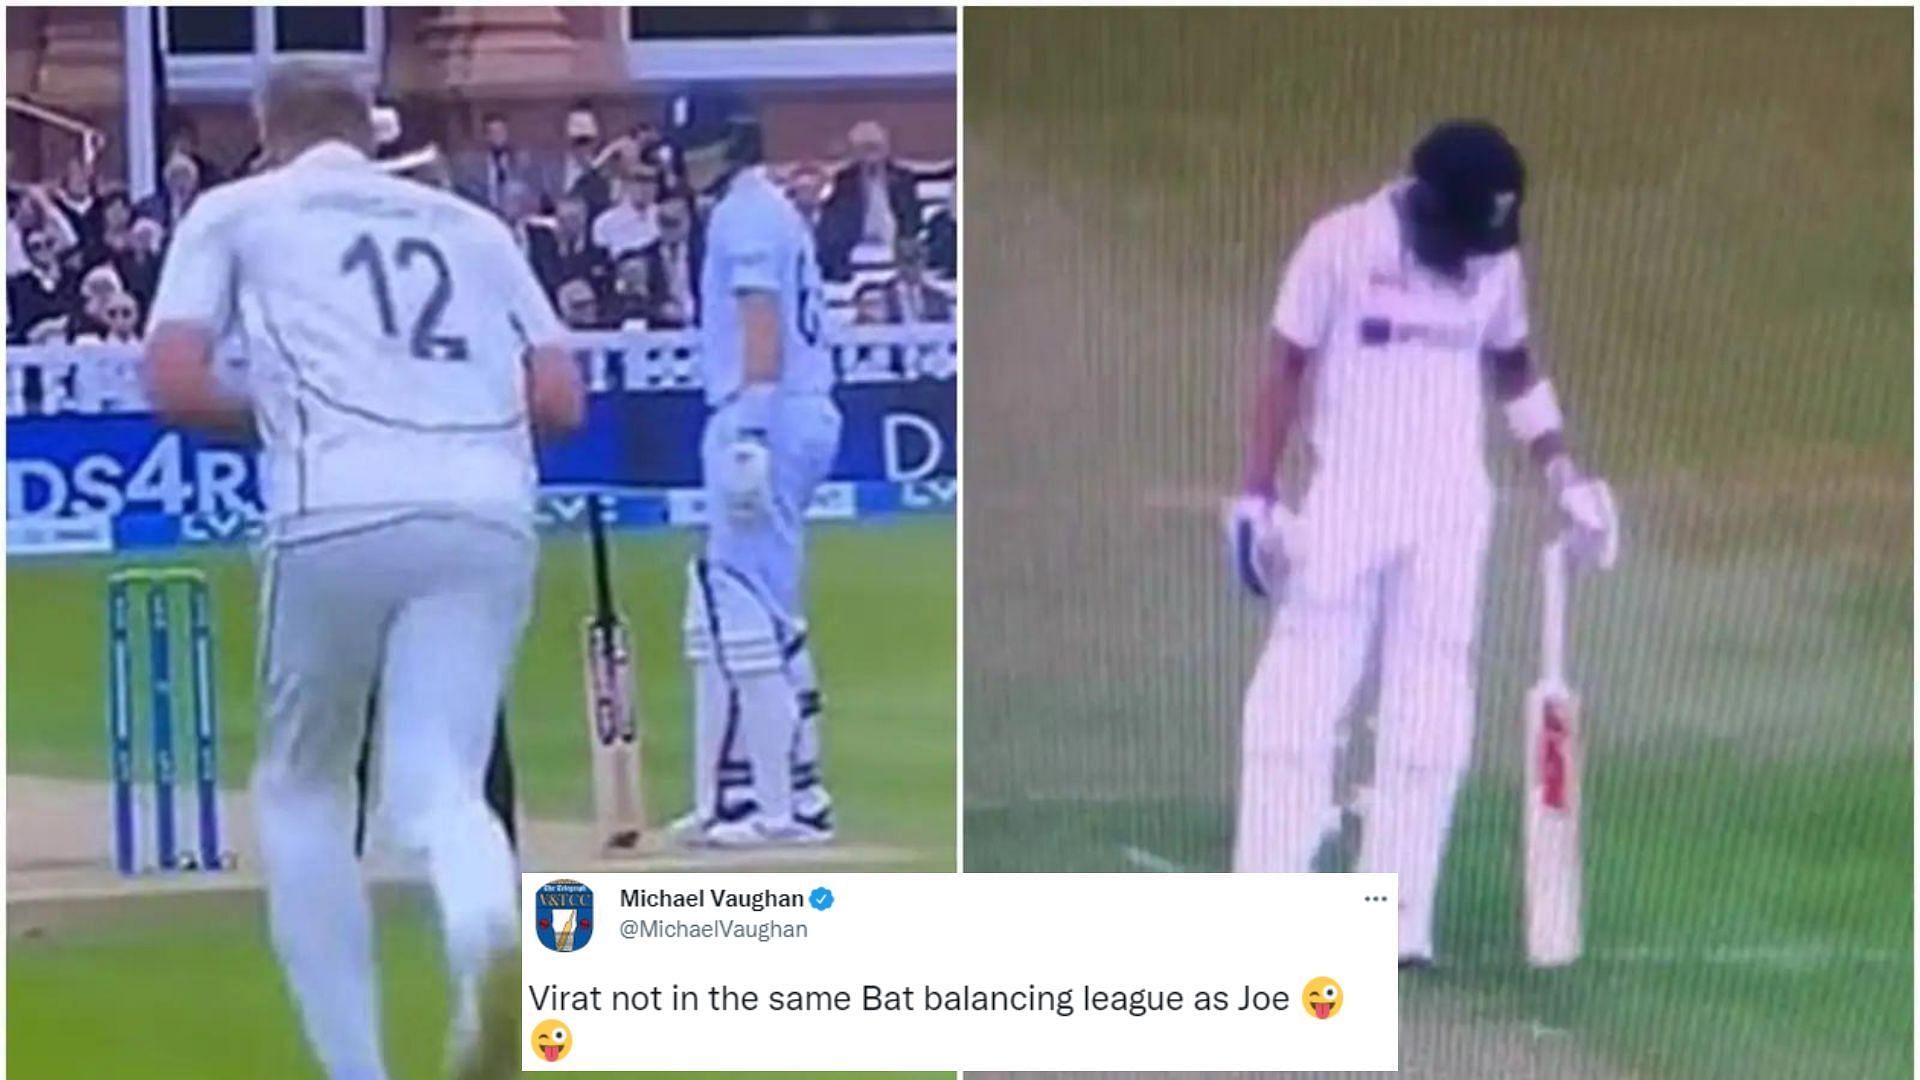 Michael Vaughan reacted to Kohli trying to balance his bat like Root. (P.C.:Twitter)